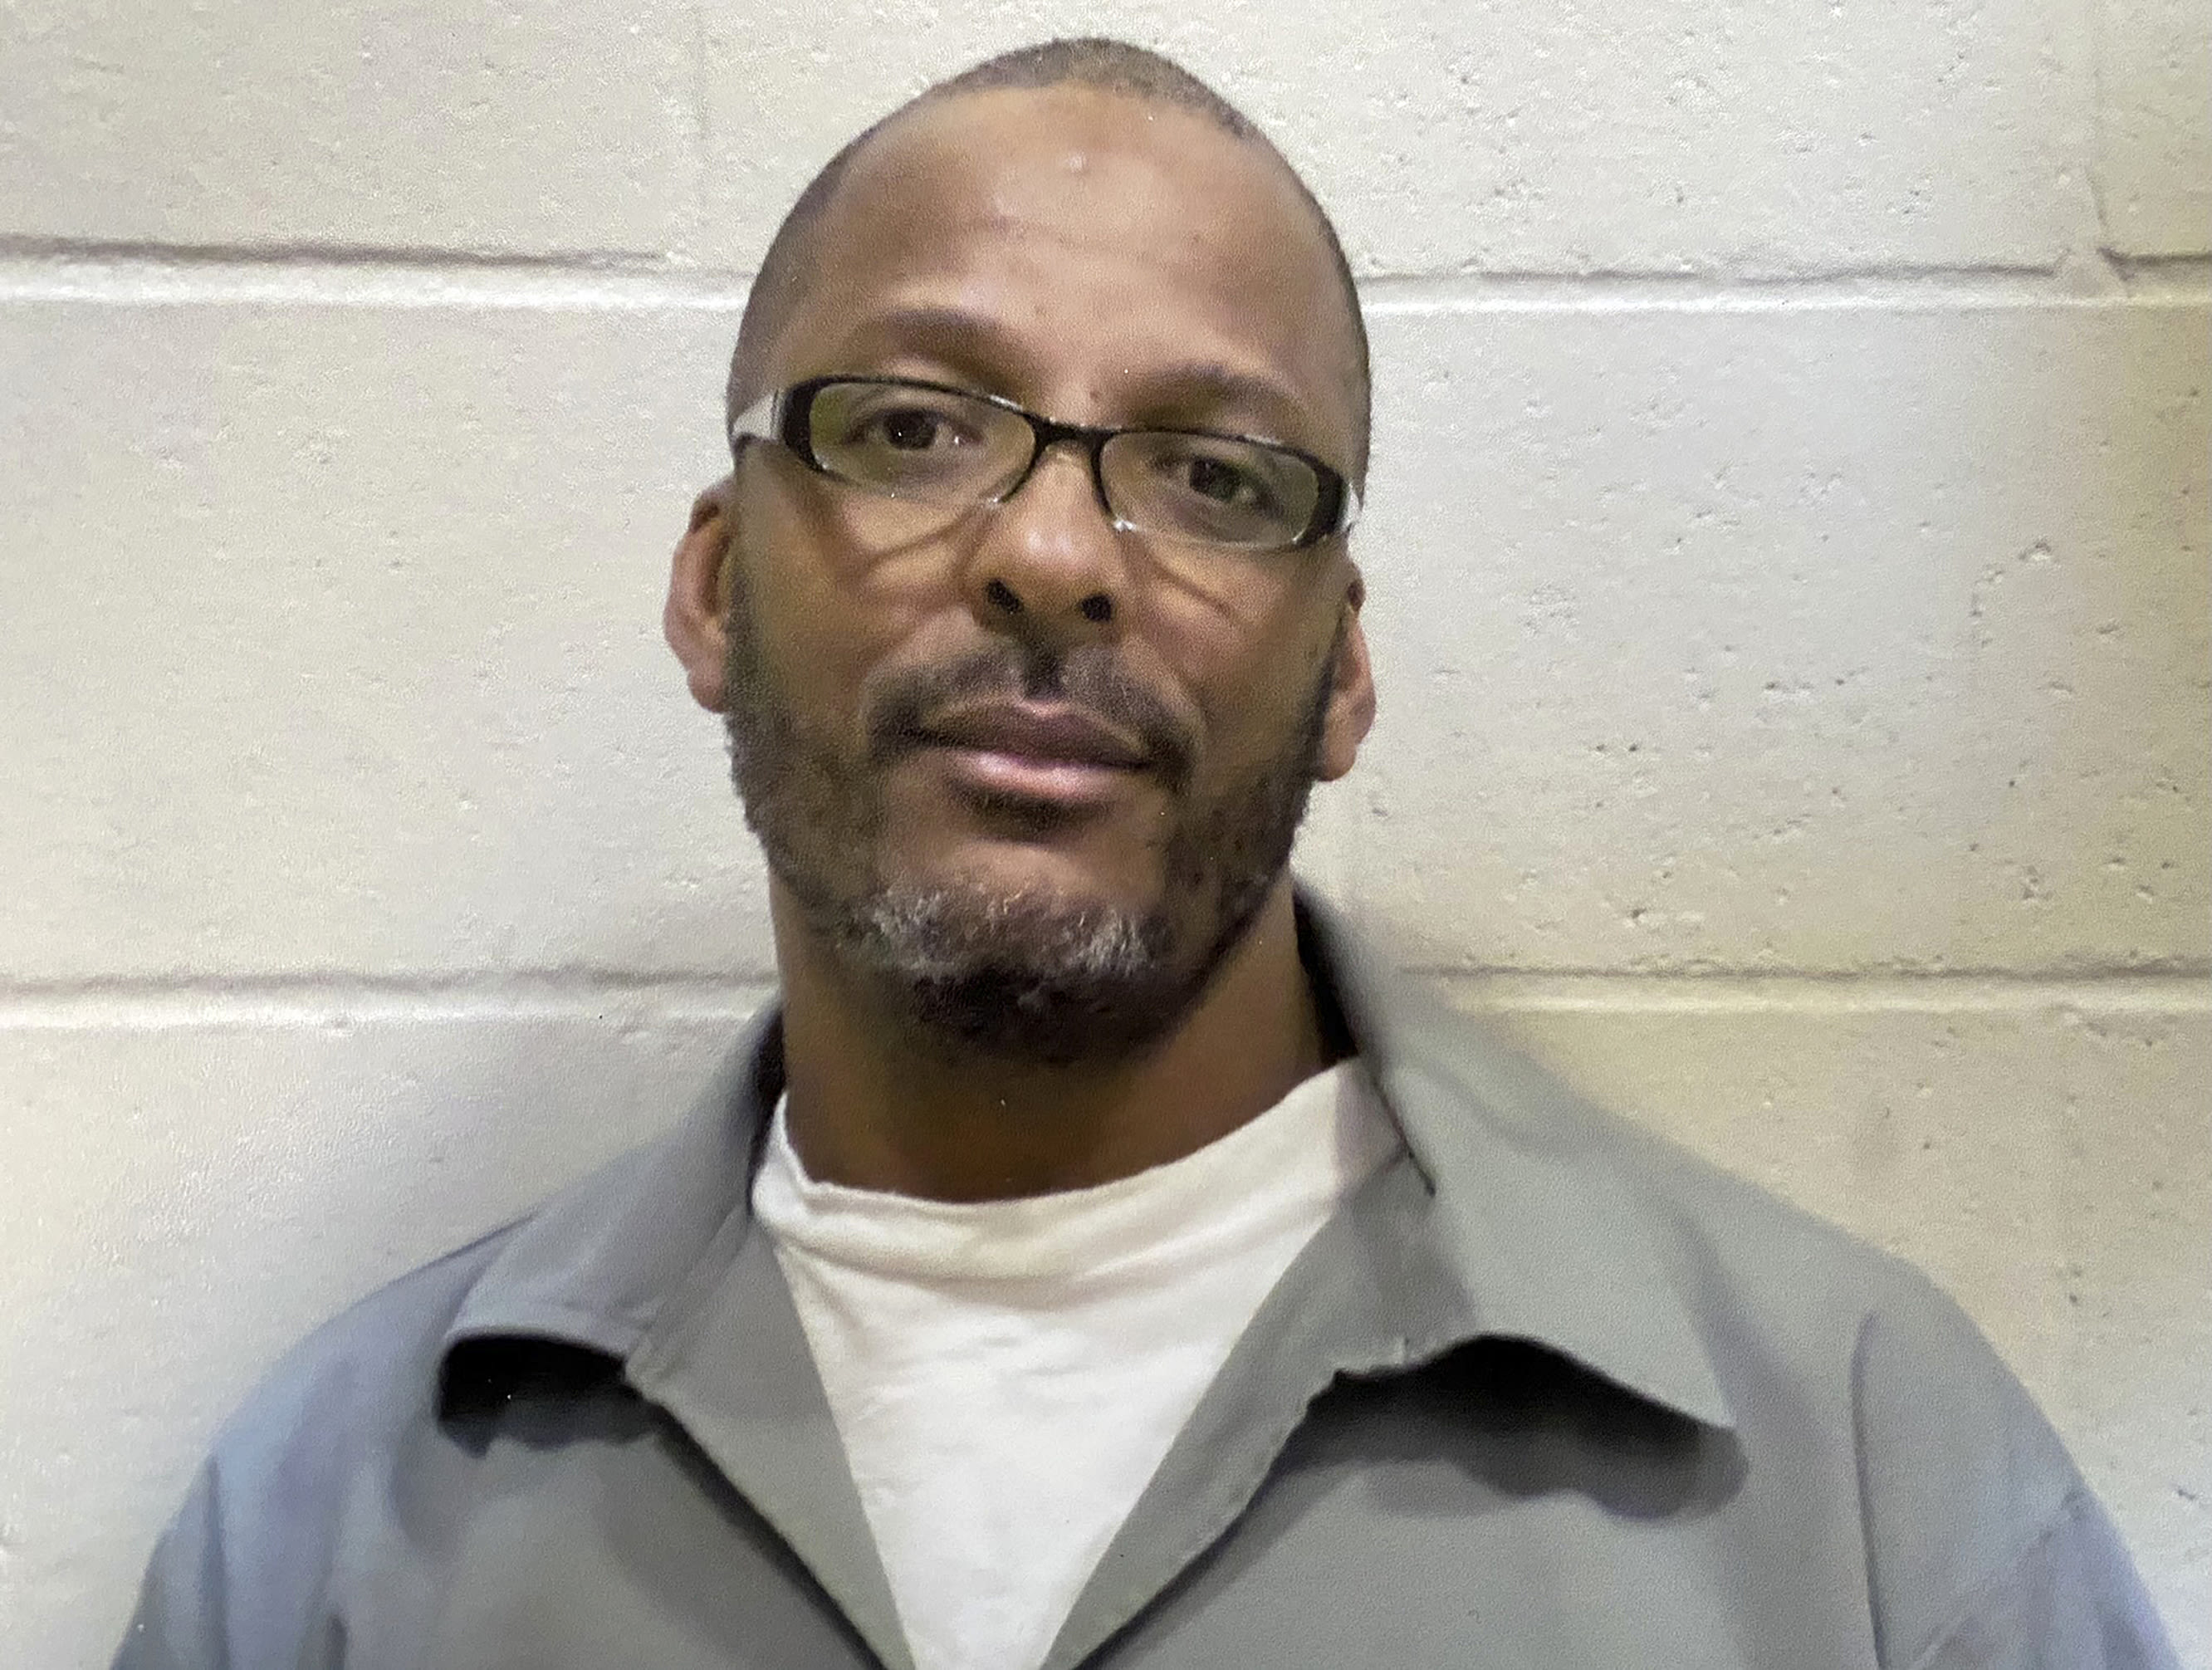 Hearing to determine if Missouri man who has been in prison for 33 years was wrongfully convicted